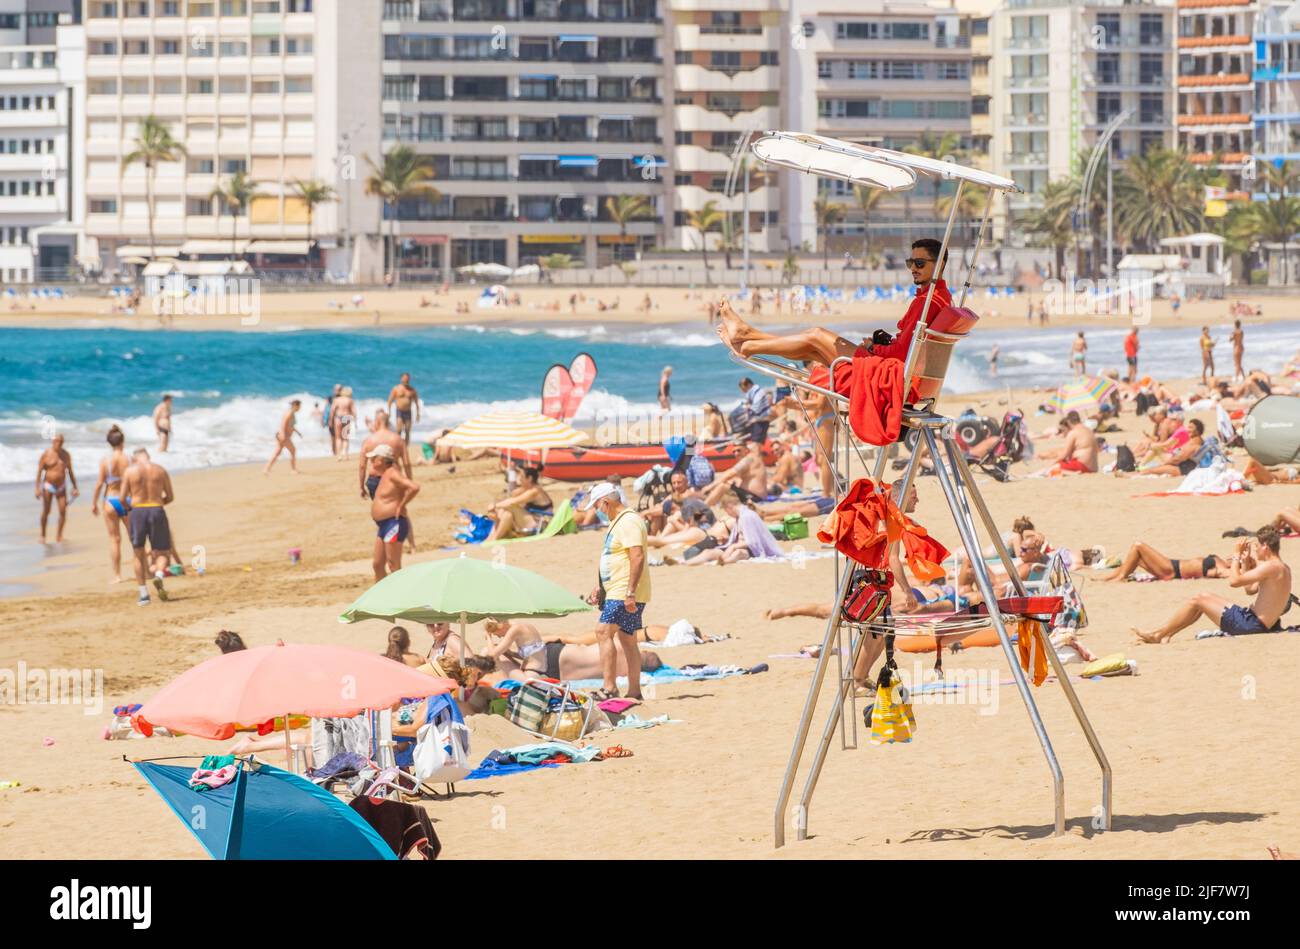 Las Palmas, Gran Canaria, Canary Islands, Spain. 30th June, 2022. Tourists, many from the UK, bask on the city beach in Las Palmas on Gran Canaria; a popular holiday destination for many UK holidaymakers. Credit: Alan Dawson/ Alamy Live News. Stock Photo